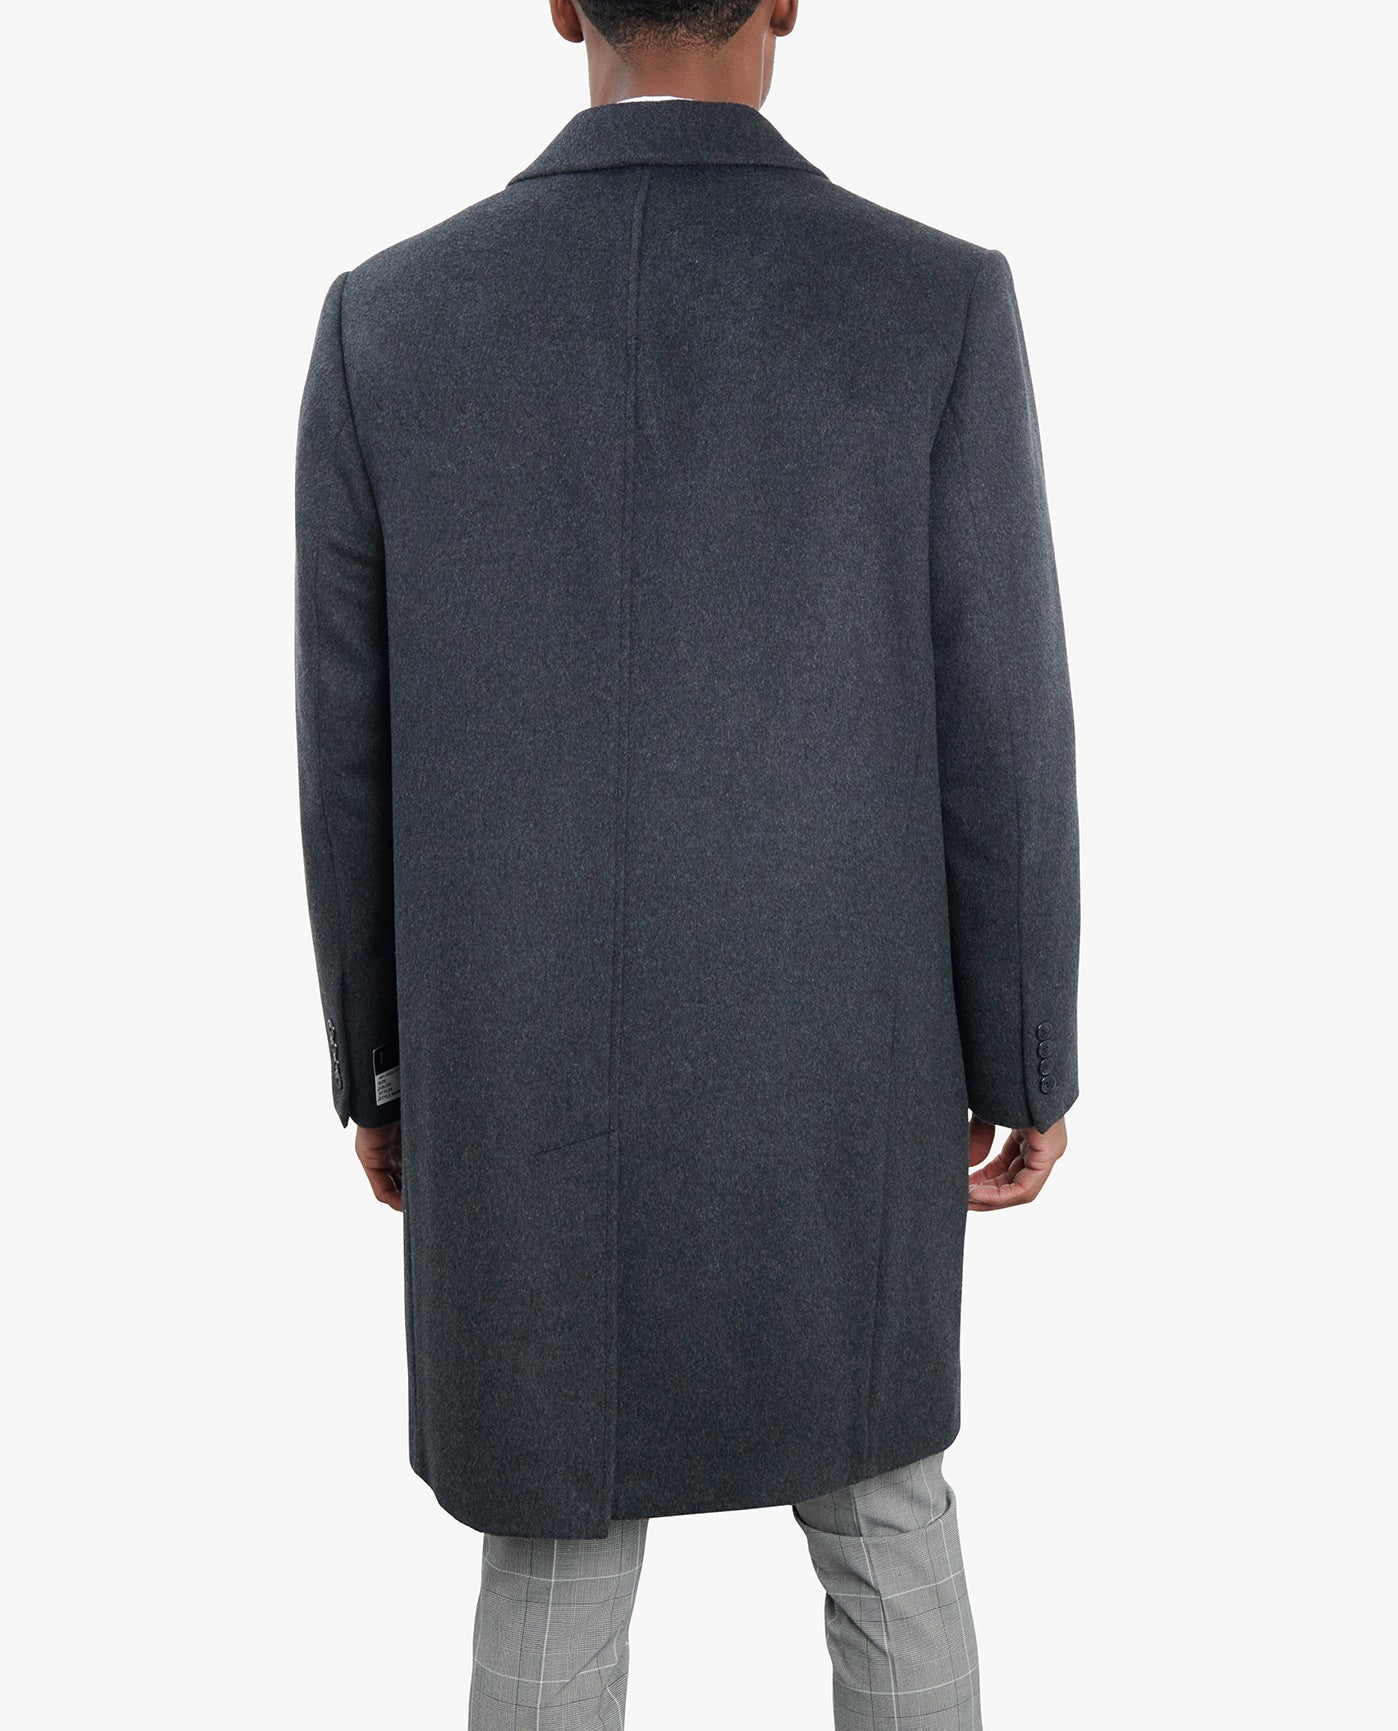 BACK VIEW OF SIGNATURE 42" SINGLE BREASTED WOOL JACKET | CHARCOAL